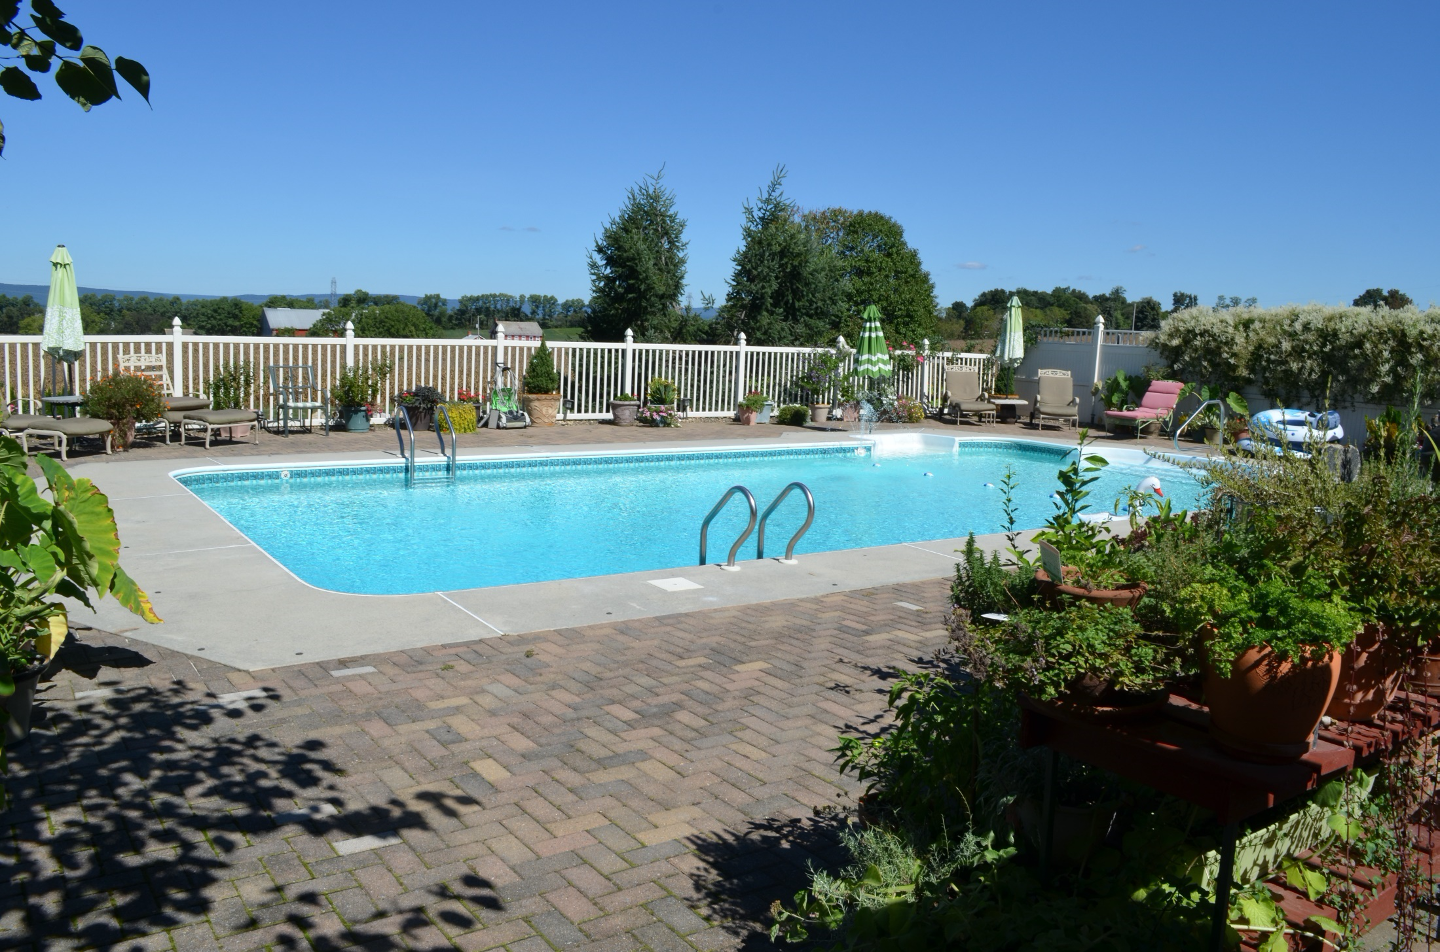 Large swimming pool with big brick deck and surrounded by gardens of potted plants.